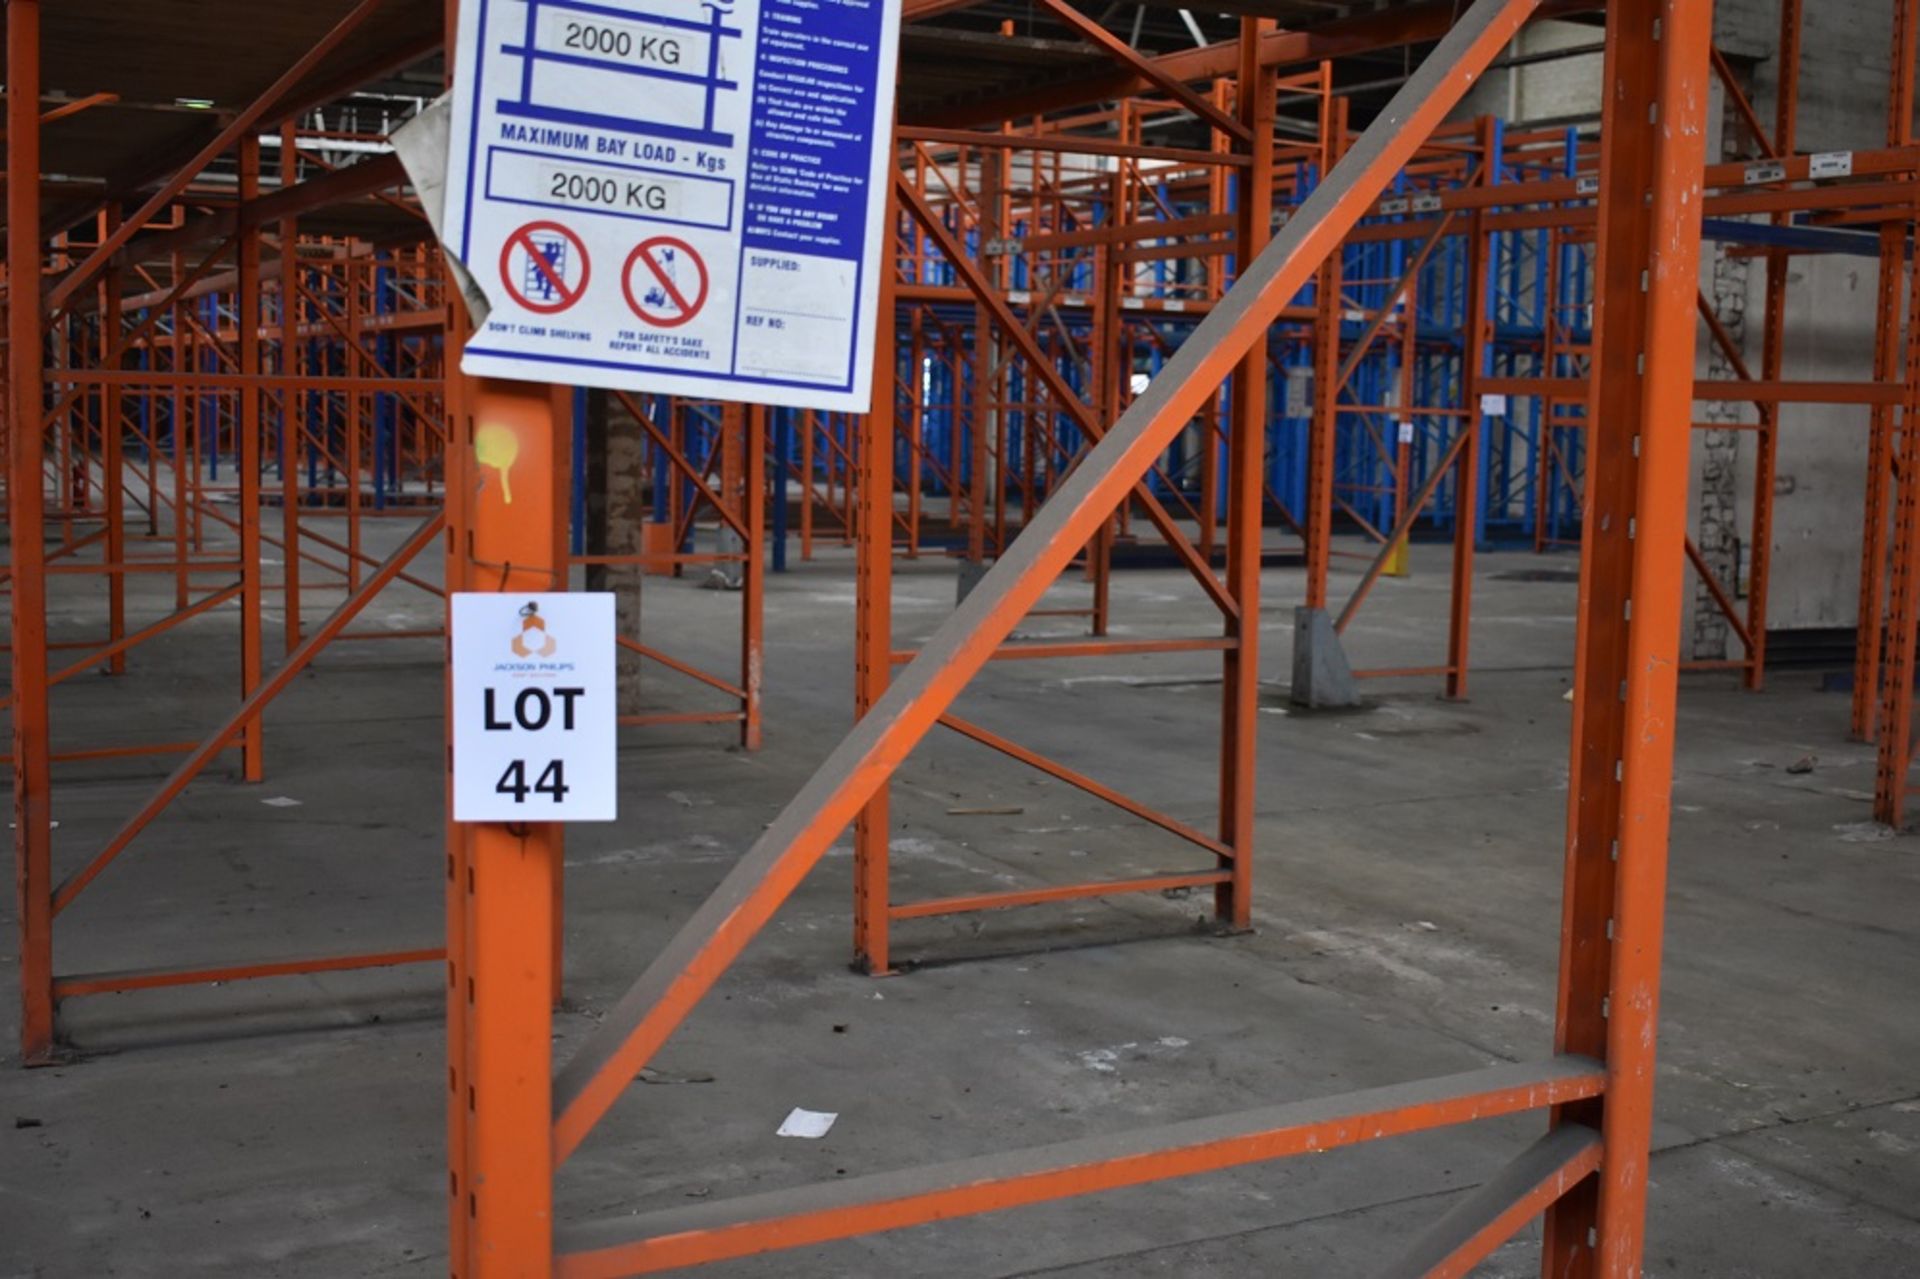 20 X BAYS OF 3 MTR HIGH BOLTLESS PALLET RACKING CONSISTING OF 40 BEAMS 21 X FRAMES